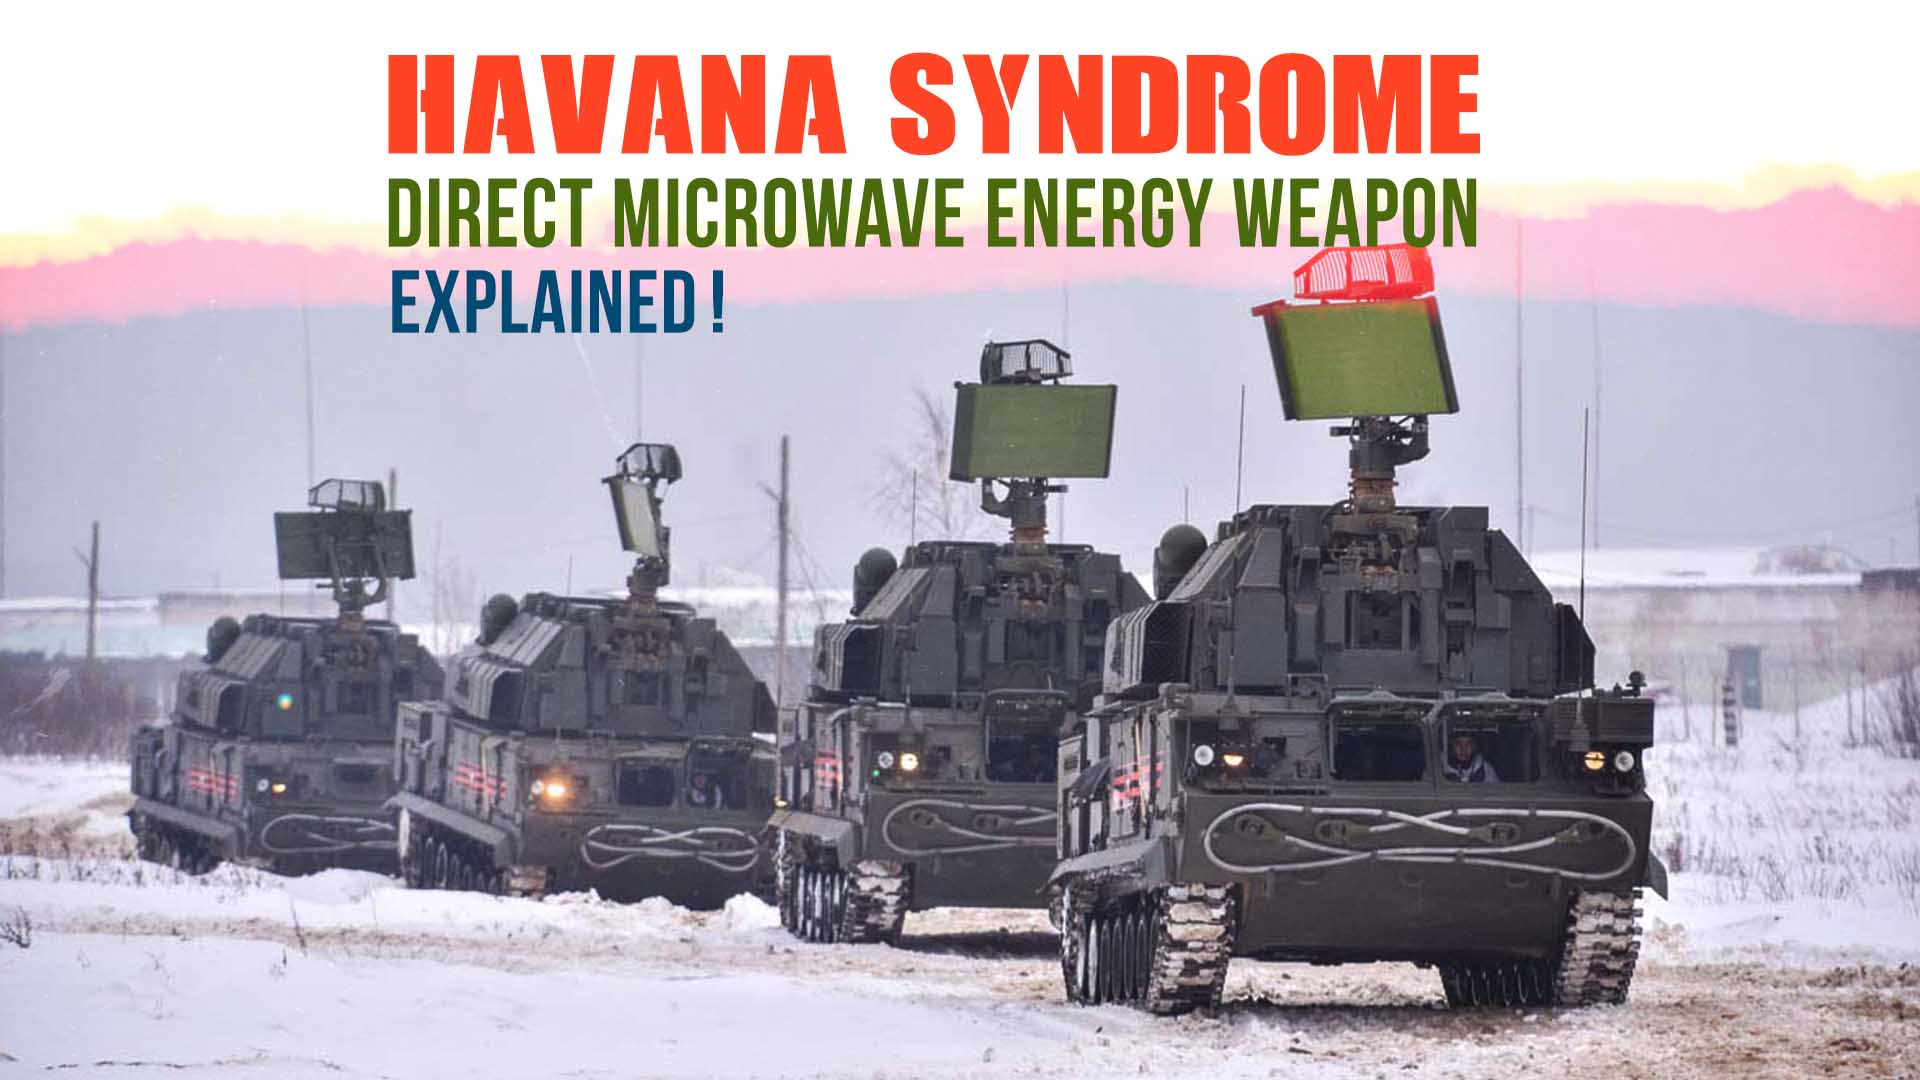 havana syndrome symptoms caused by microwave weapons